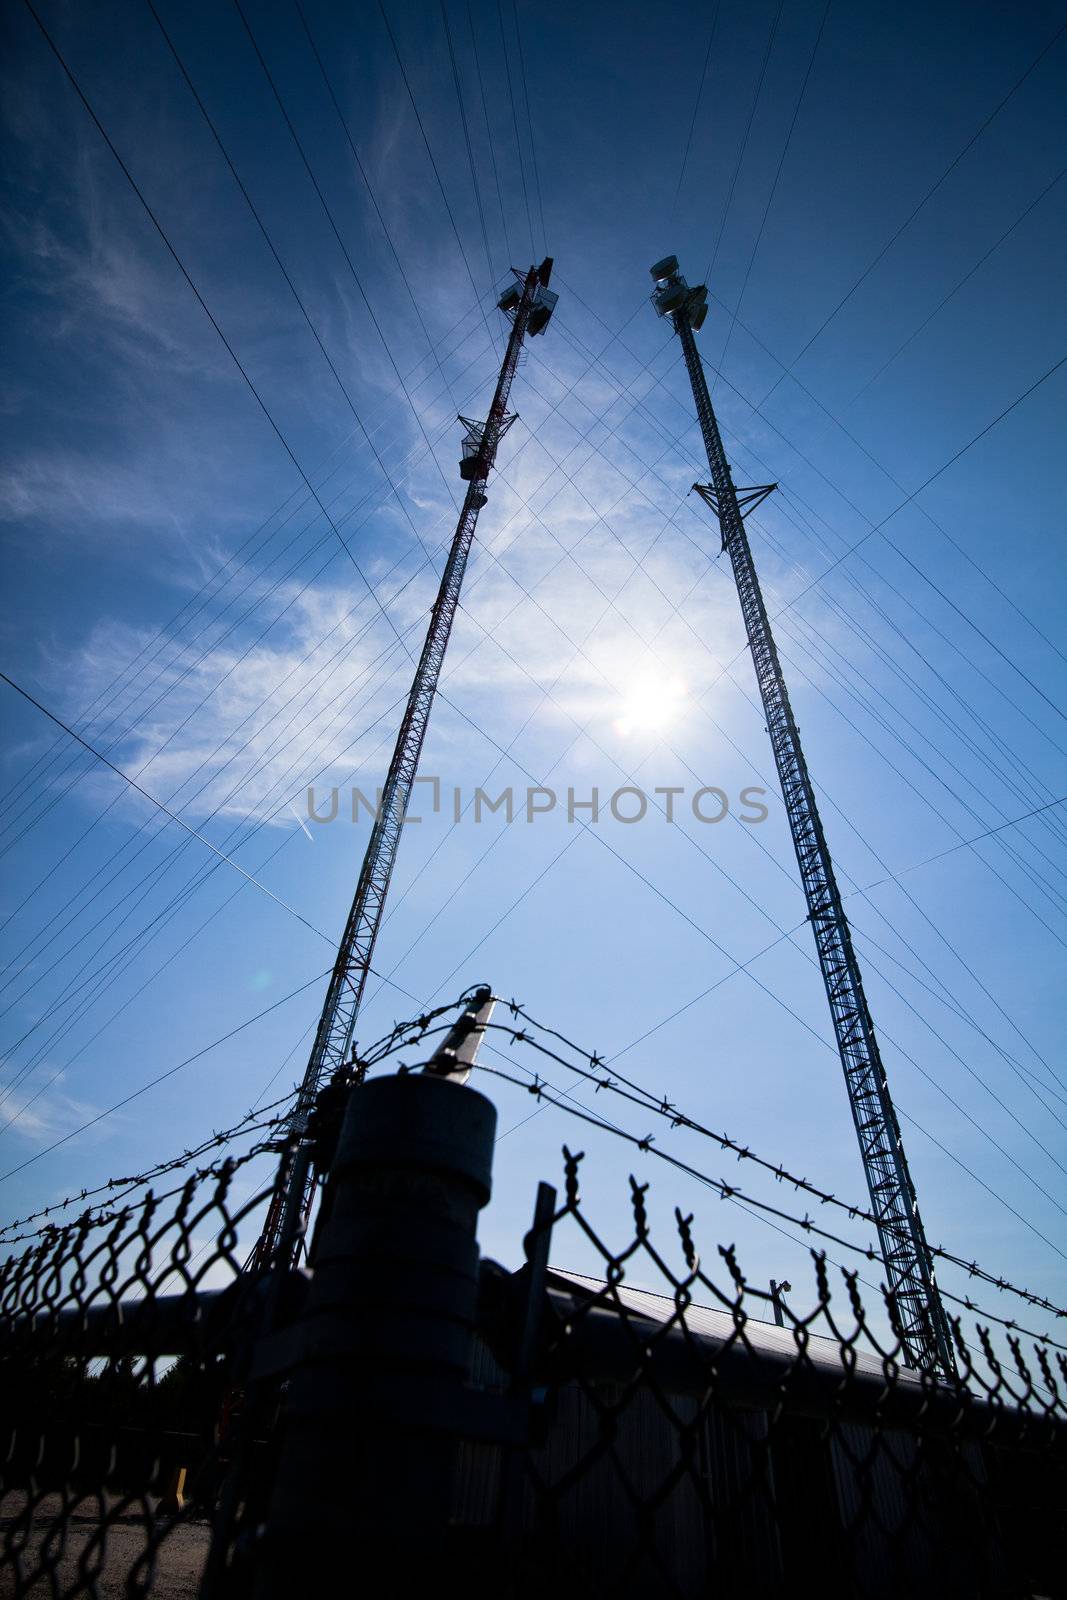 Pole with electrical wires and communication tower surounded by a fence